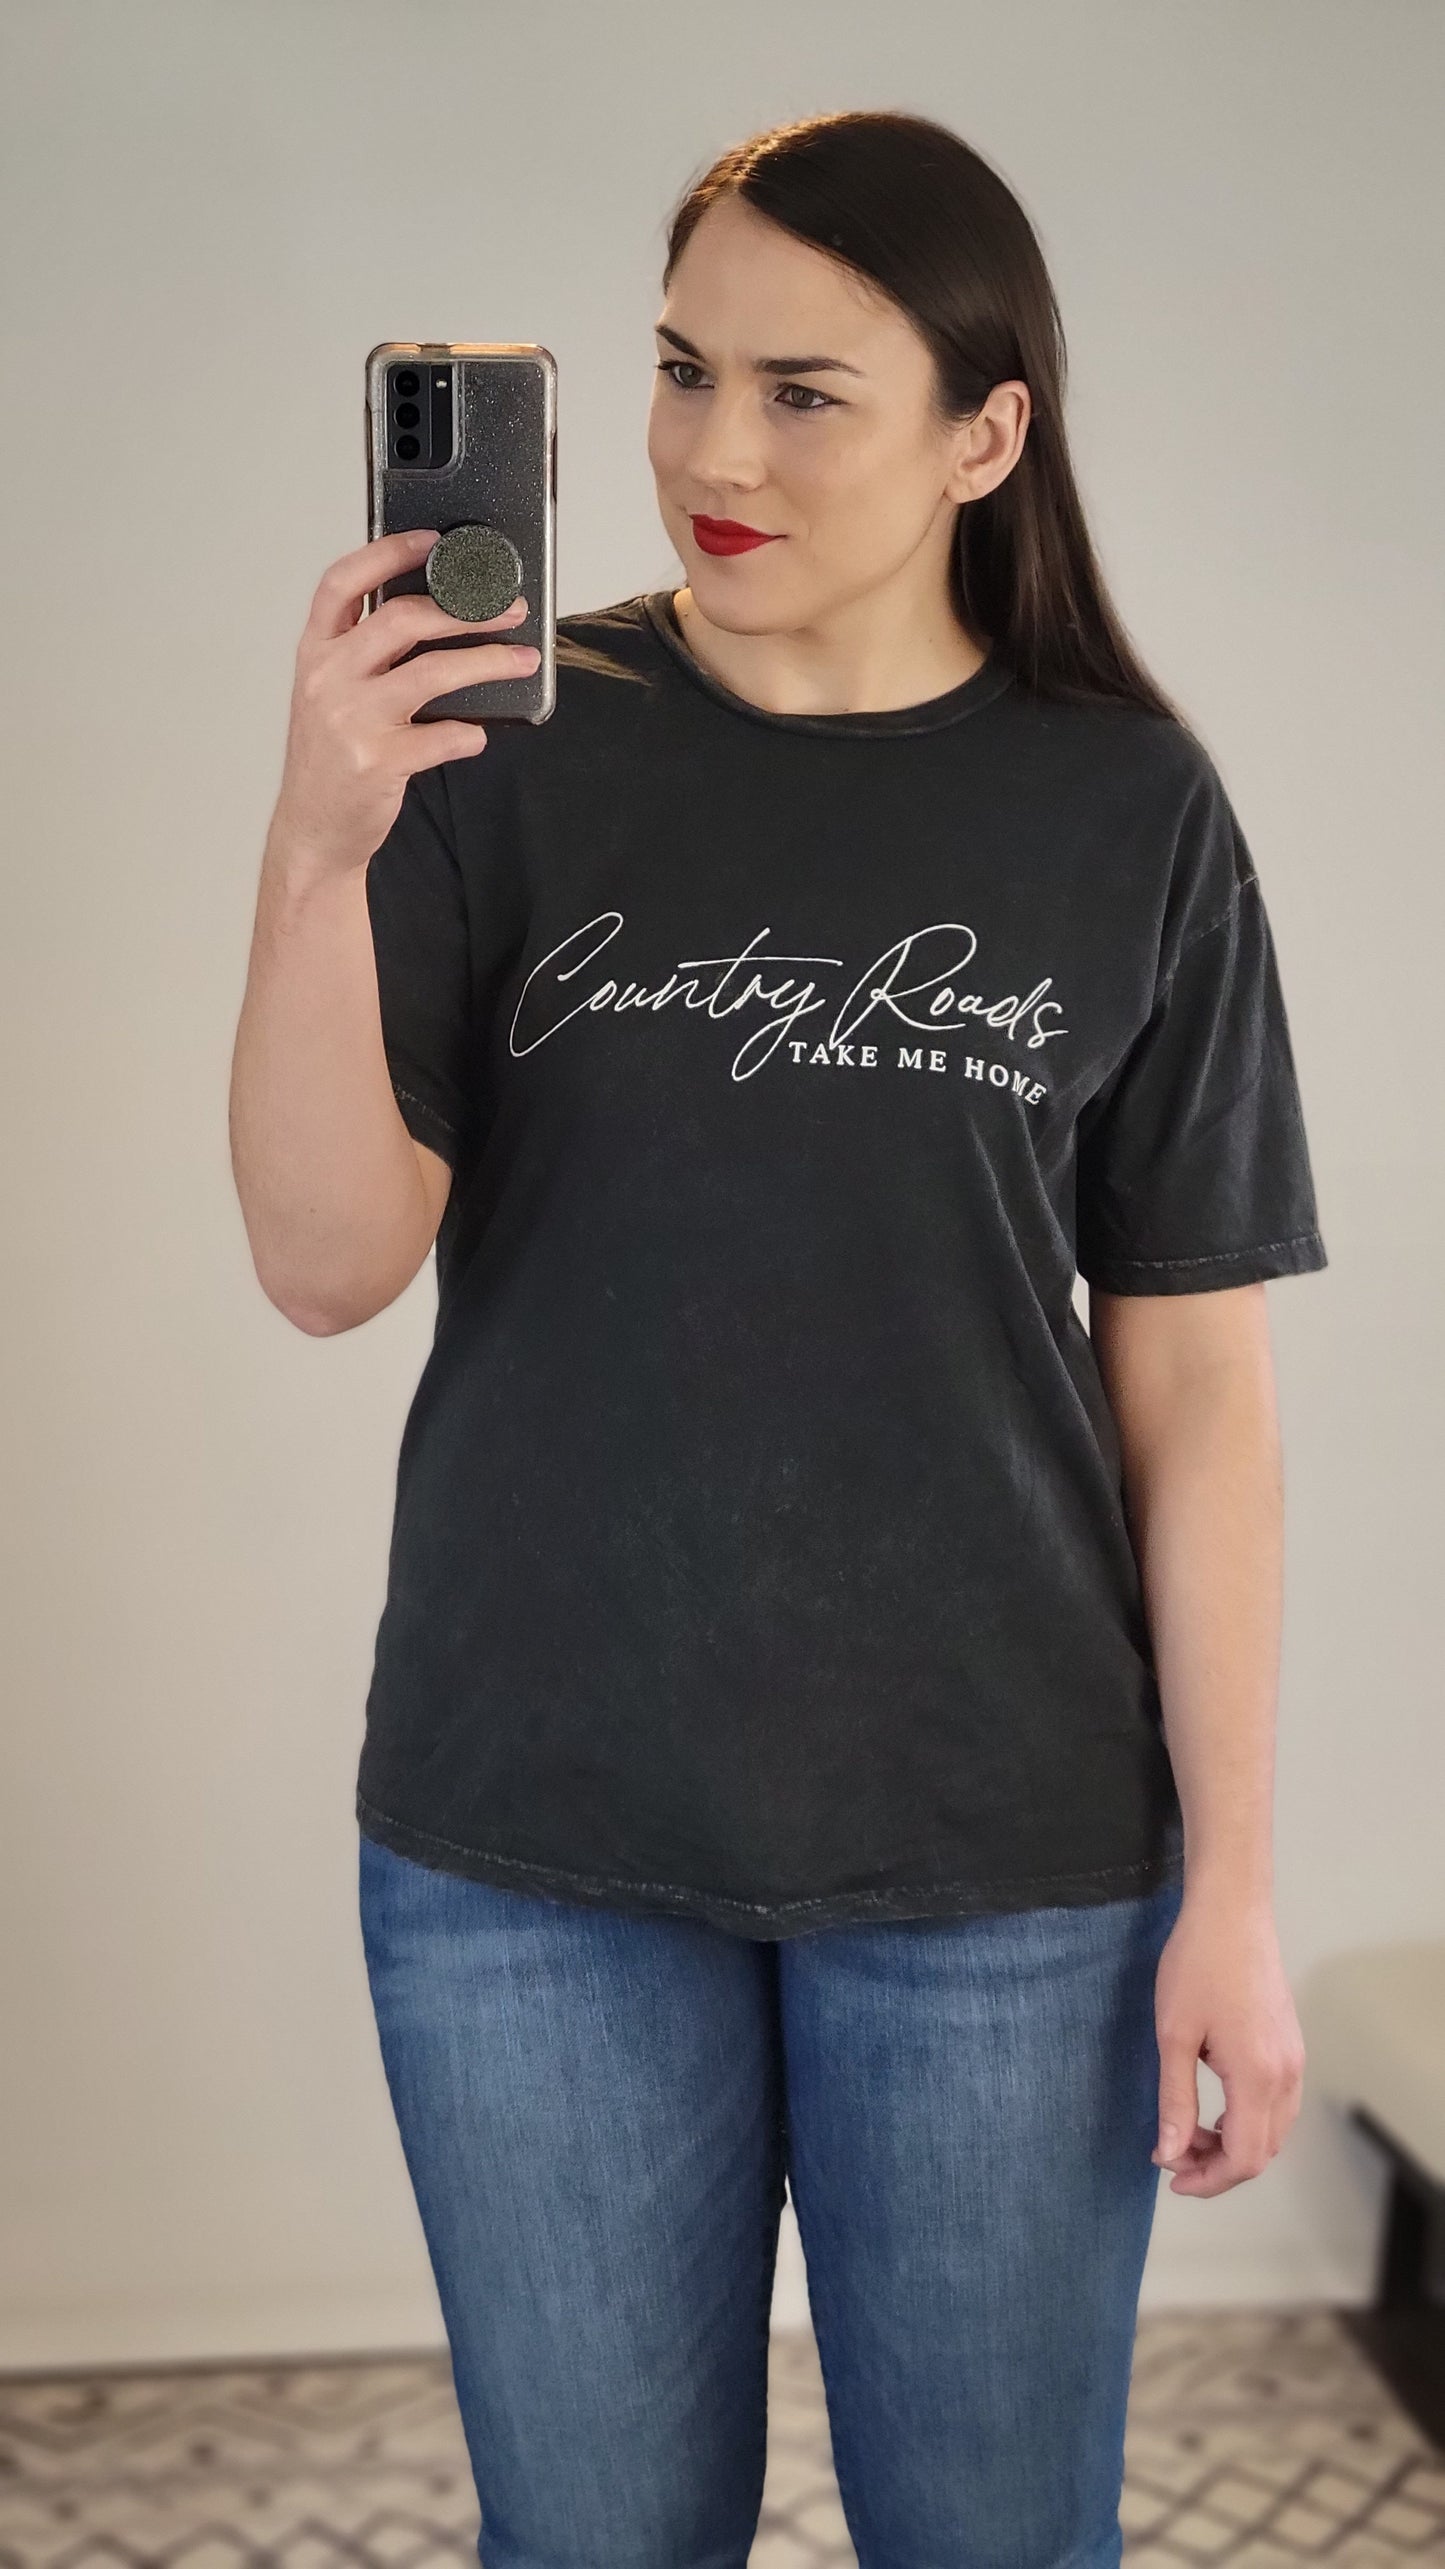 Mineral Black Country Roads Take Me Home Graphic Tee  "Ruth"